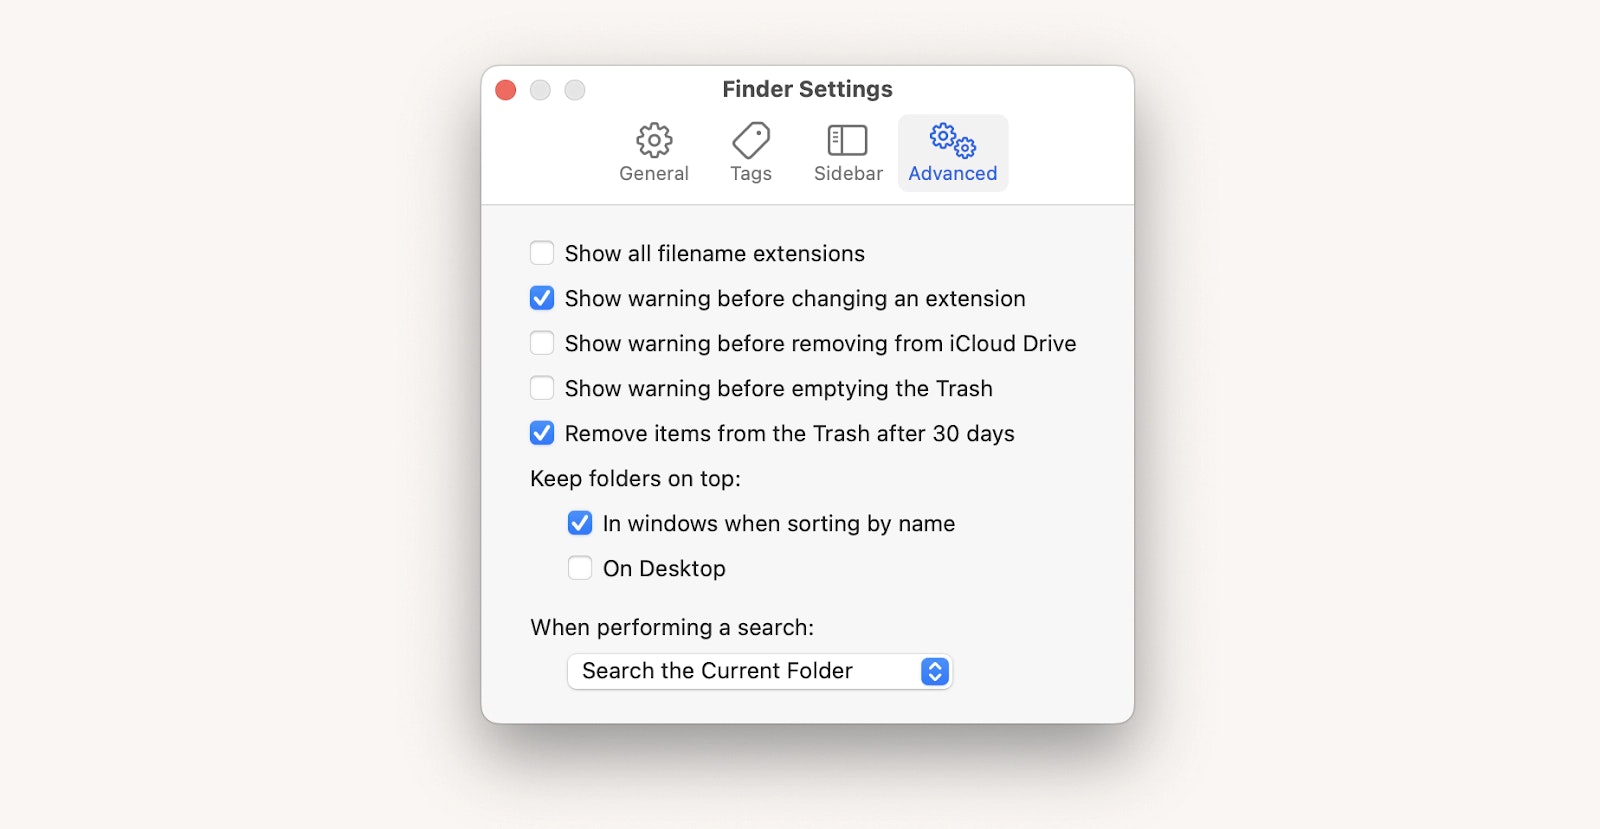 Finder settings > Remove items from the Trash after 30 days